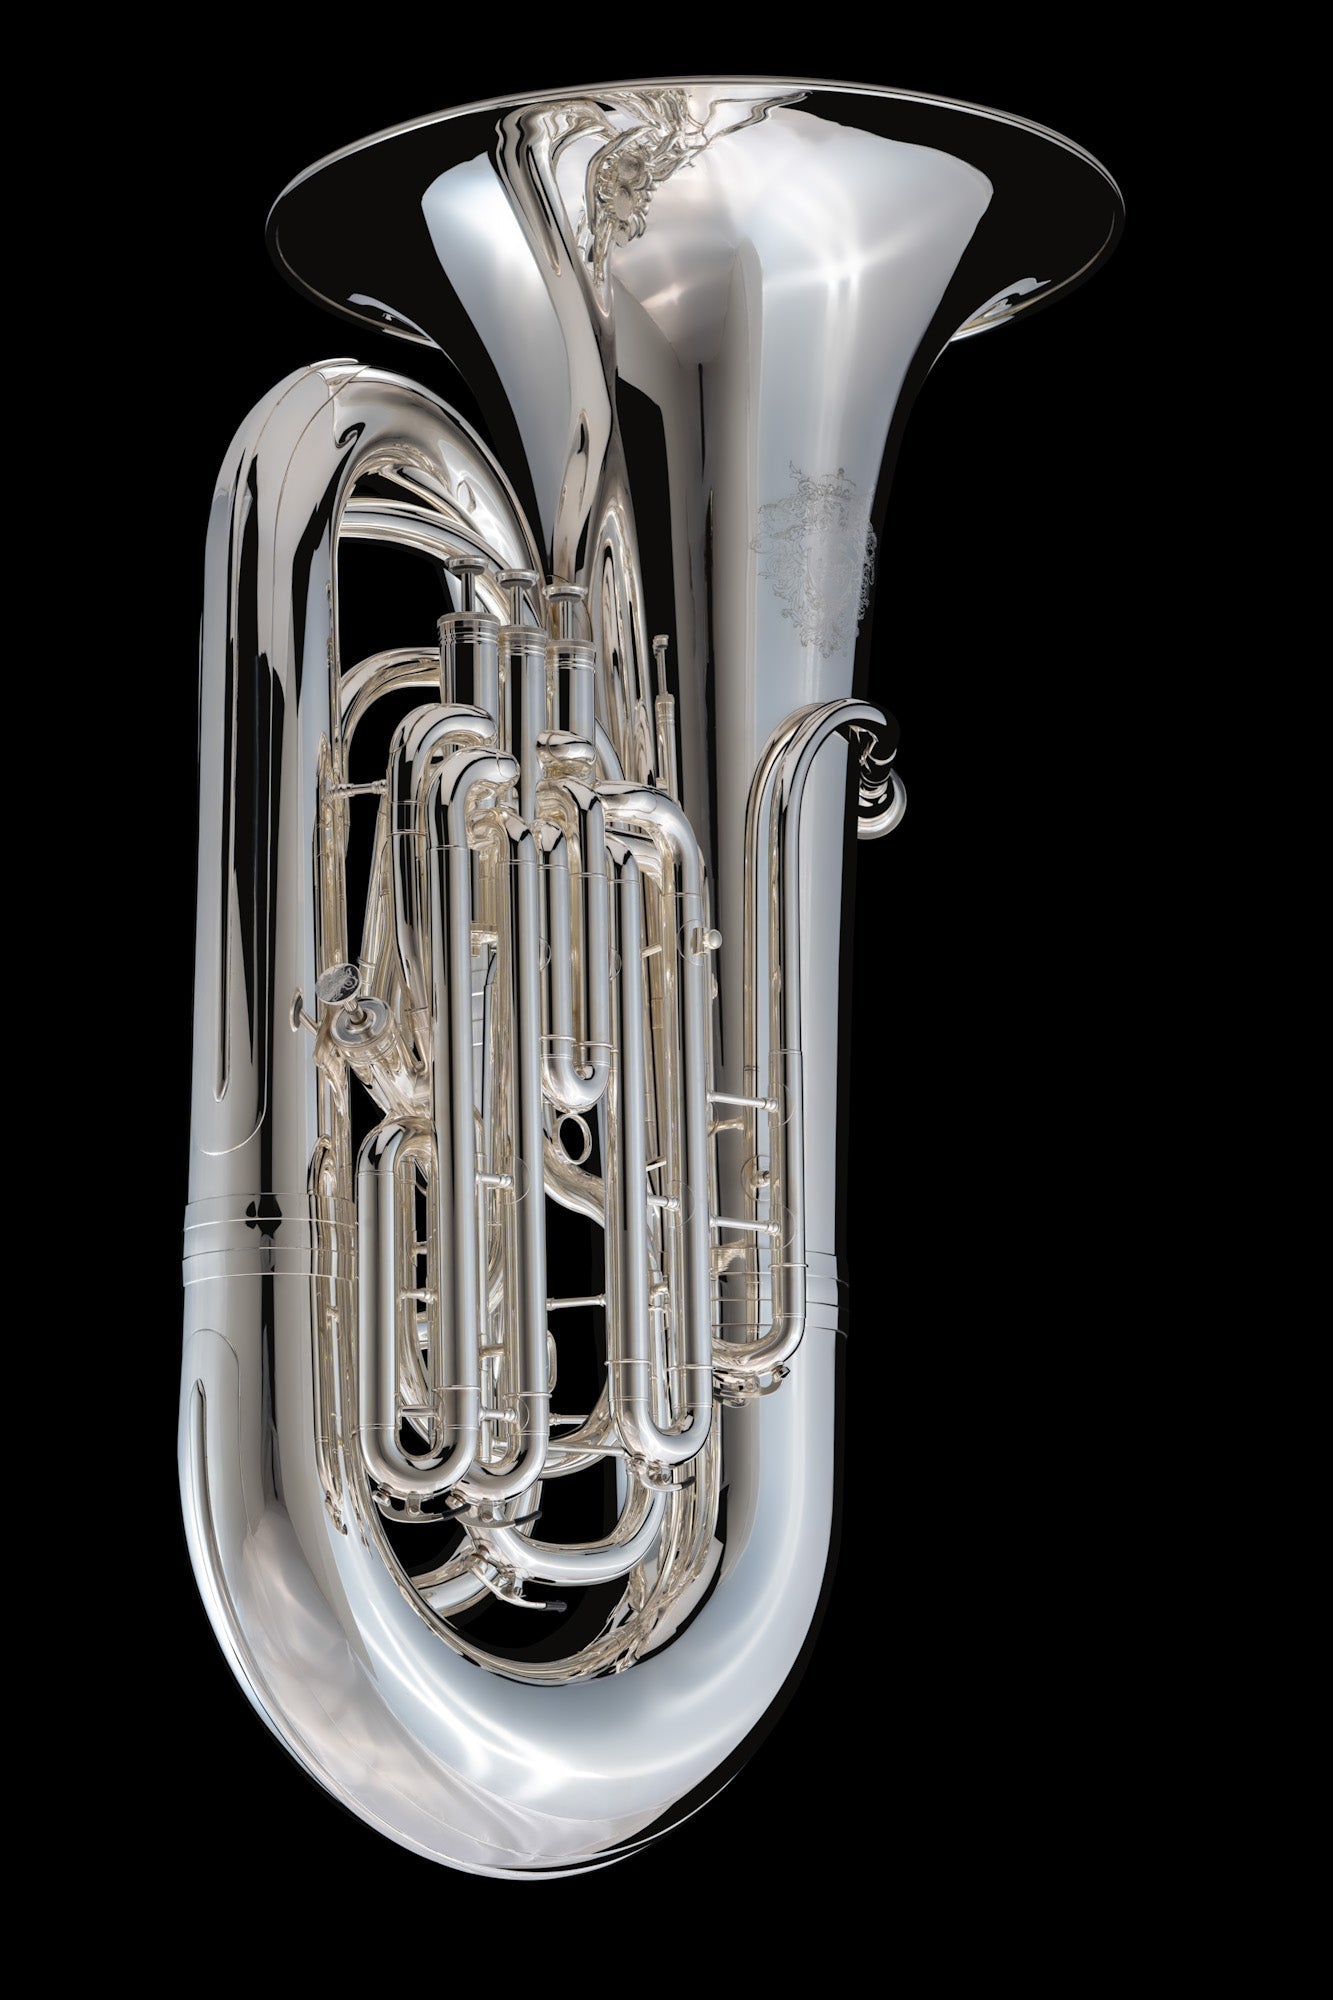 BBb 5/4 Compensated Tuba ‘Excelsior’ – TB570